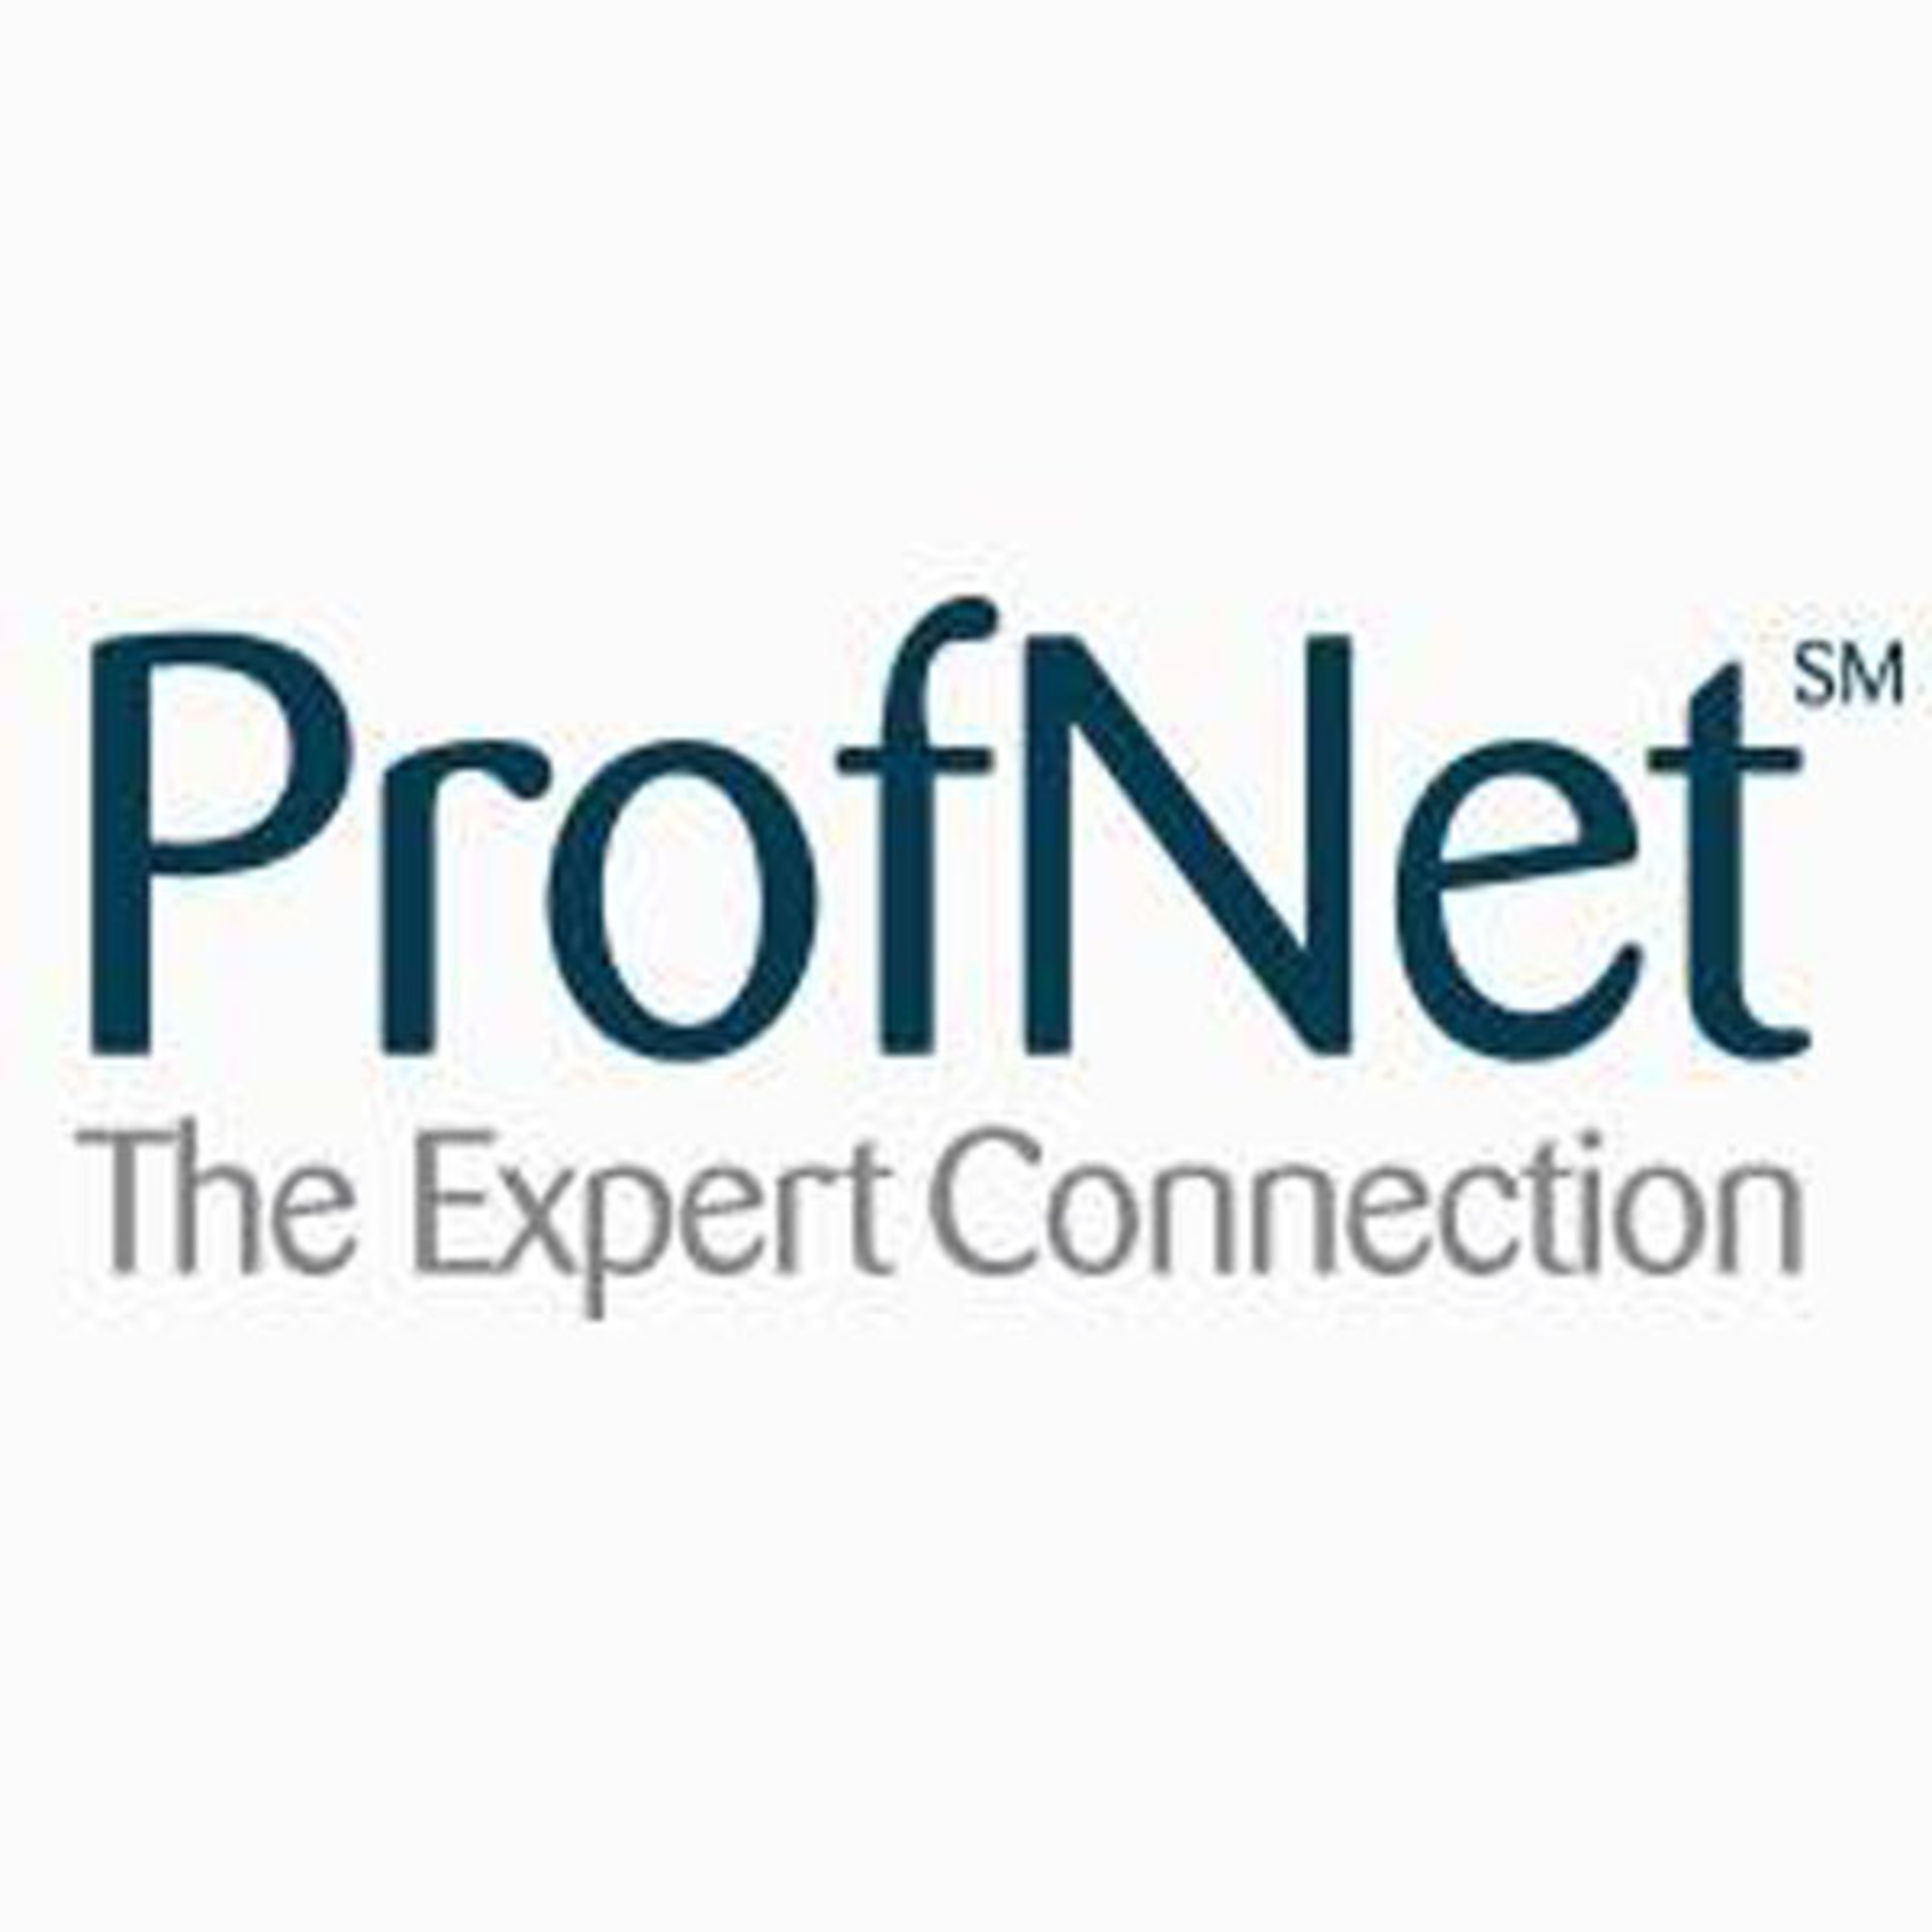 ProfNet is a service that connects journalists with subject matter experts. Find out more at  http://www.profnet.com (PRNewsFoto/ProfNet)